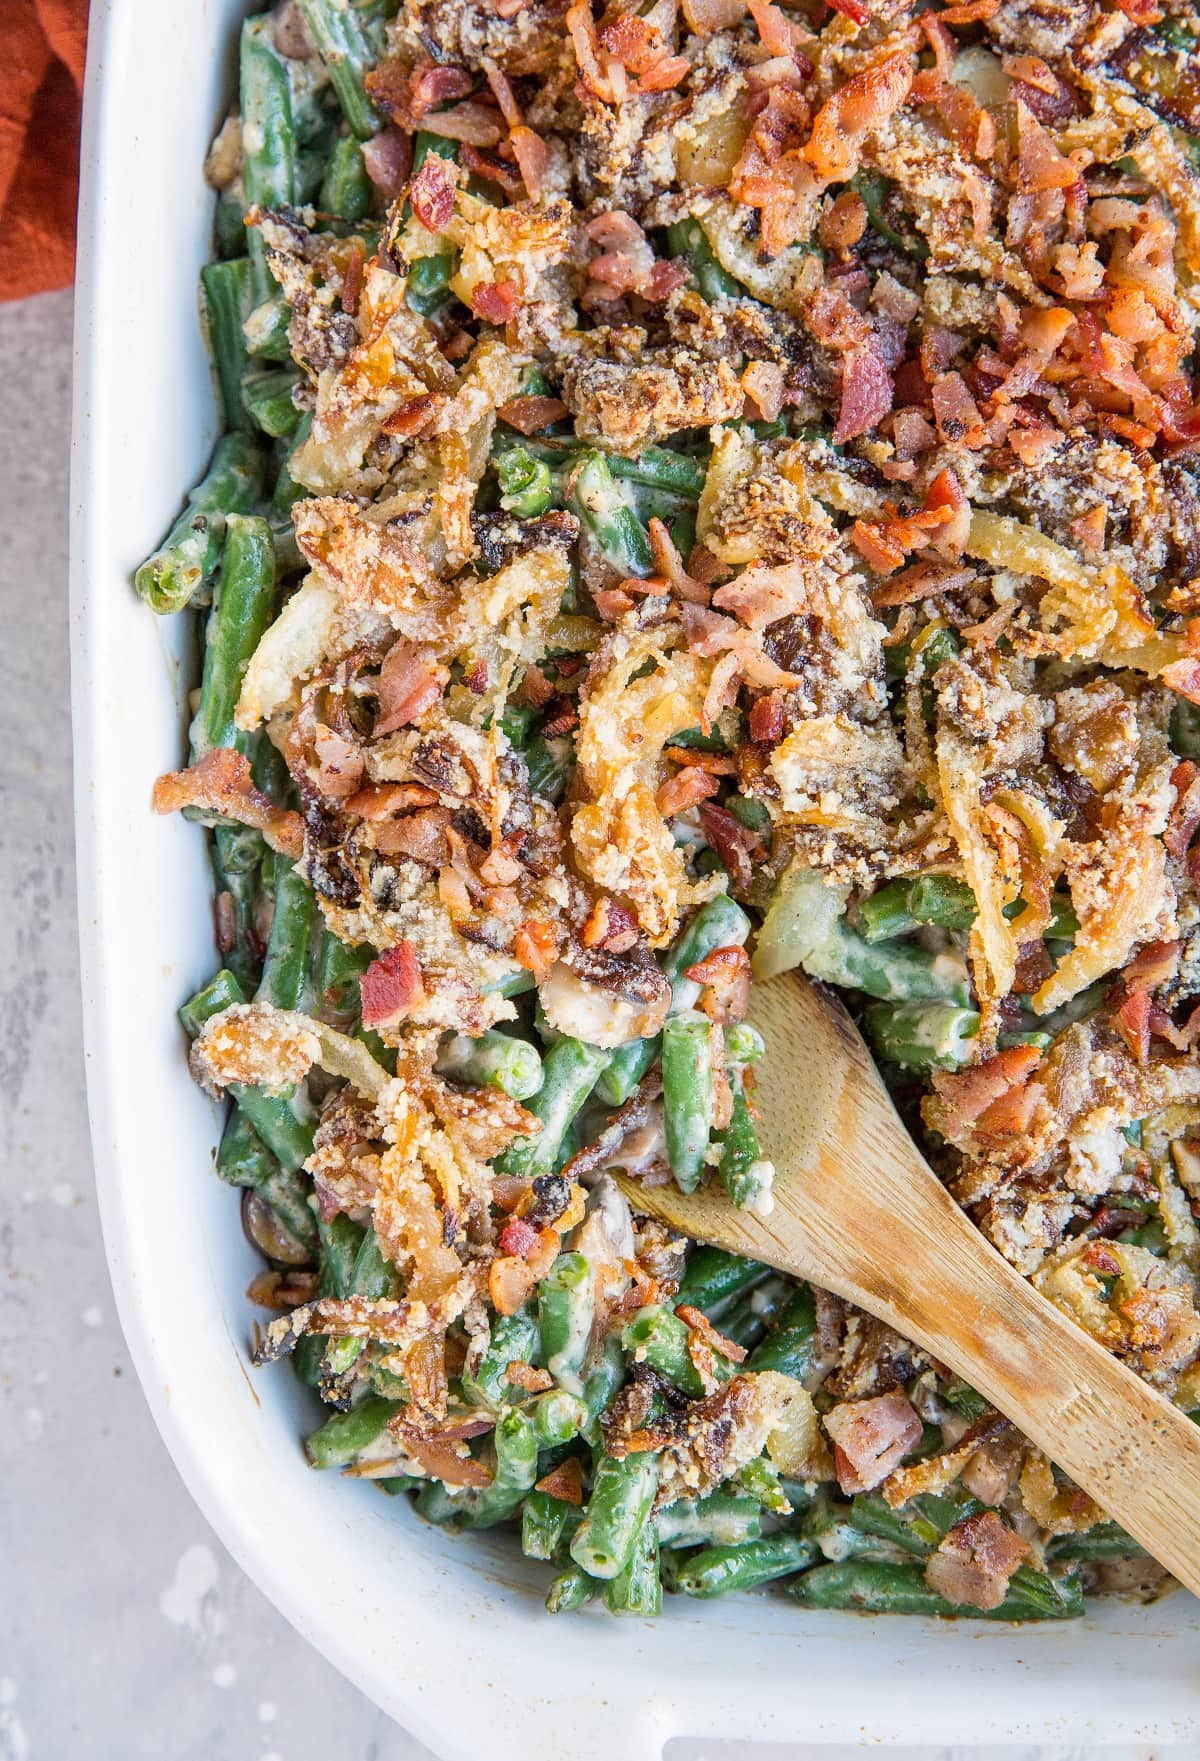 Healthy Green Bean Casserole (Dairy-Free, Gluten-Free) - a healthier recipe for the classic side dish that doesn't require cream of mushroom soup, dairy, or wheat